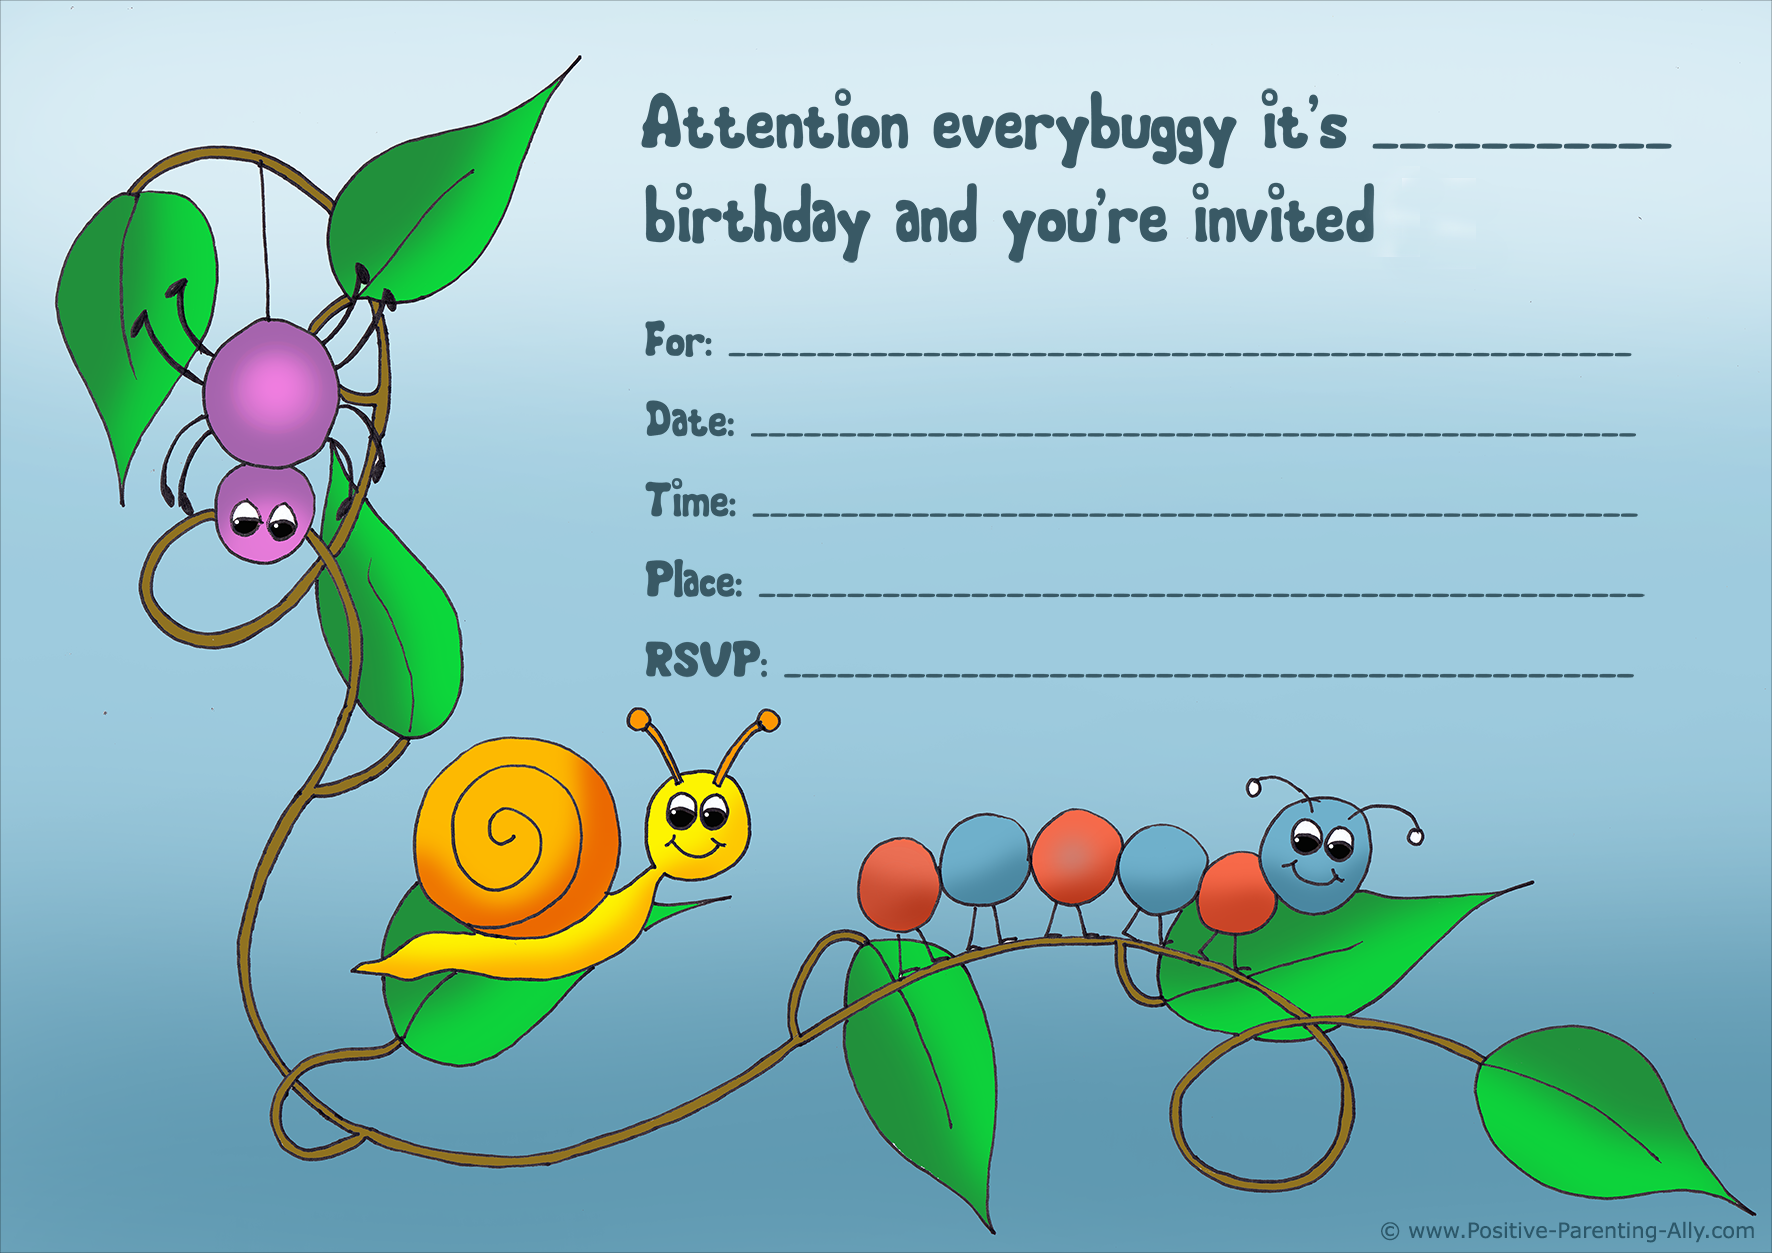 Free Birthday Party Invites For Kids In High Print Quality